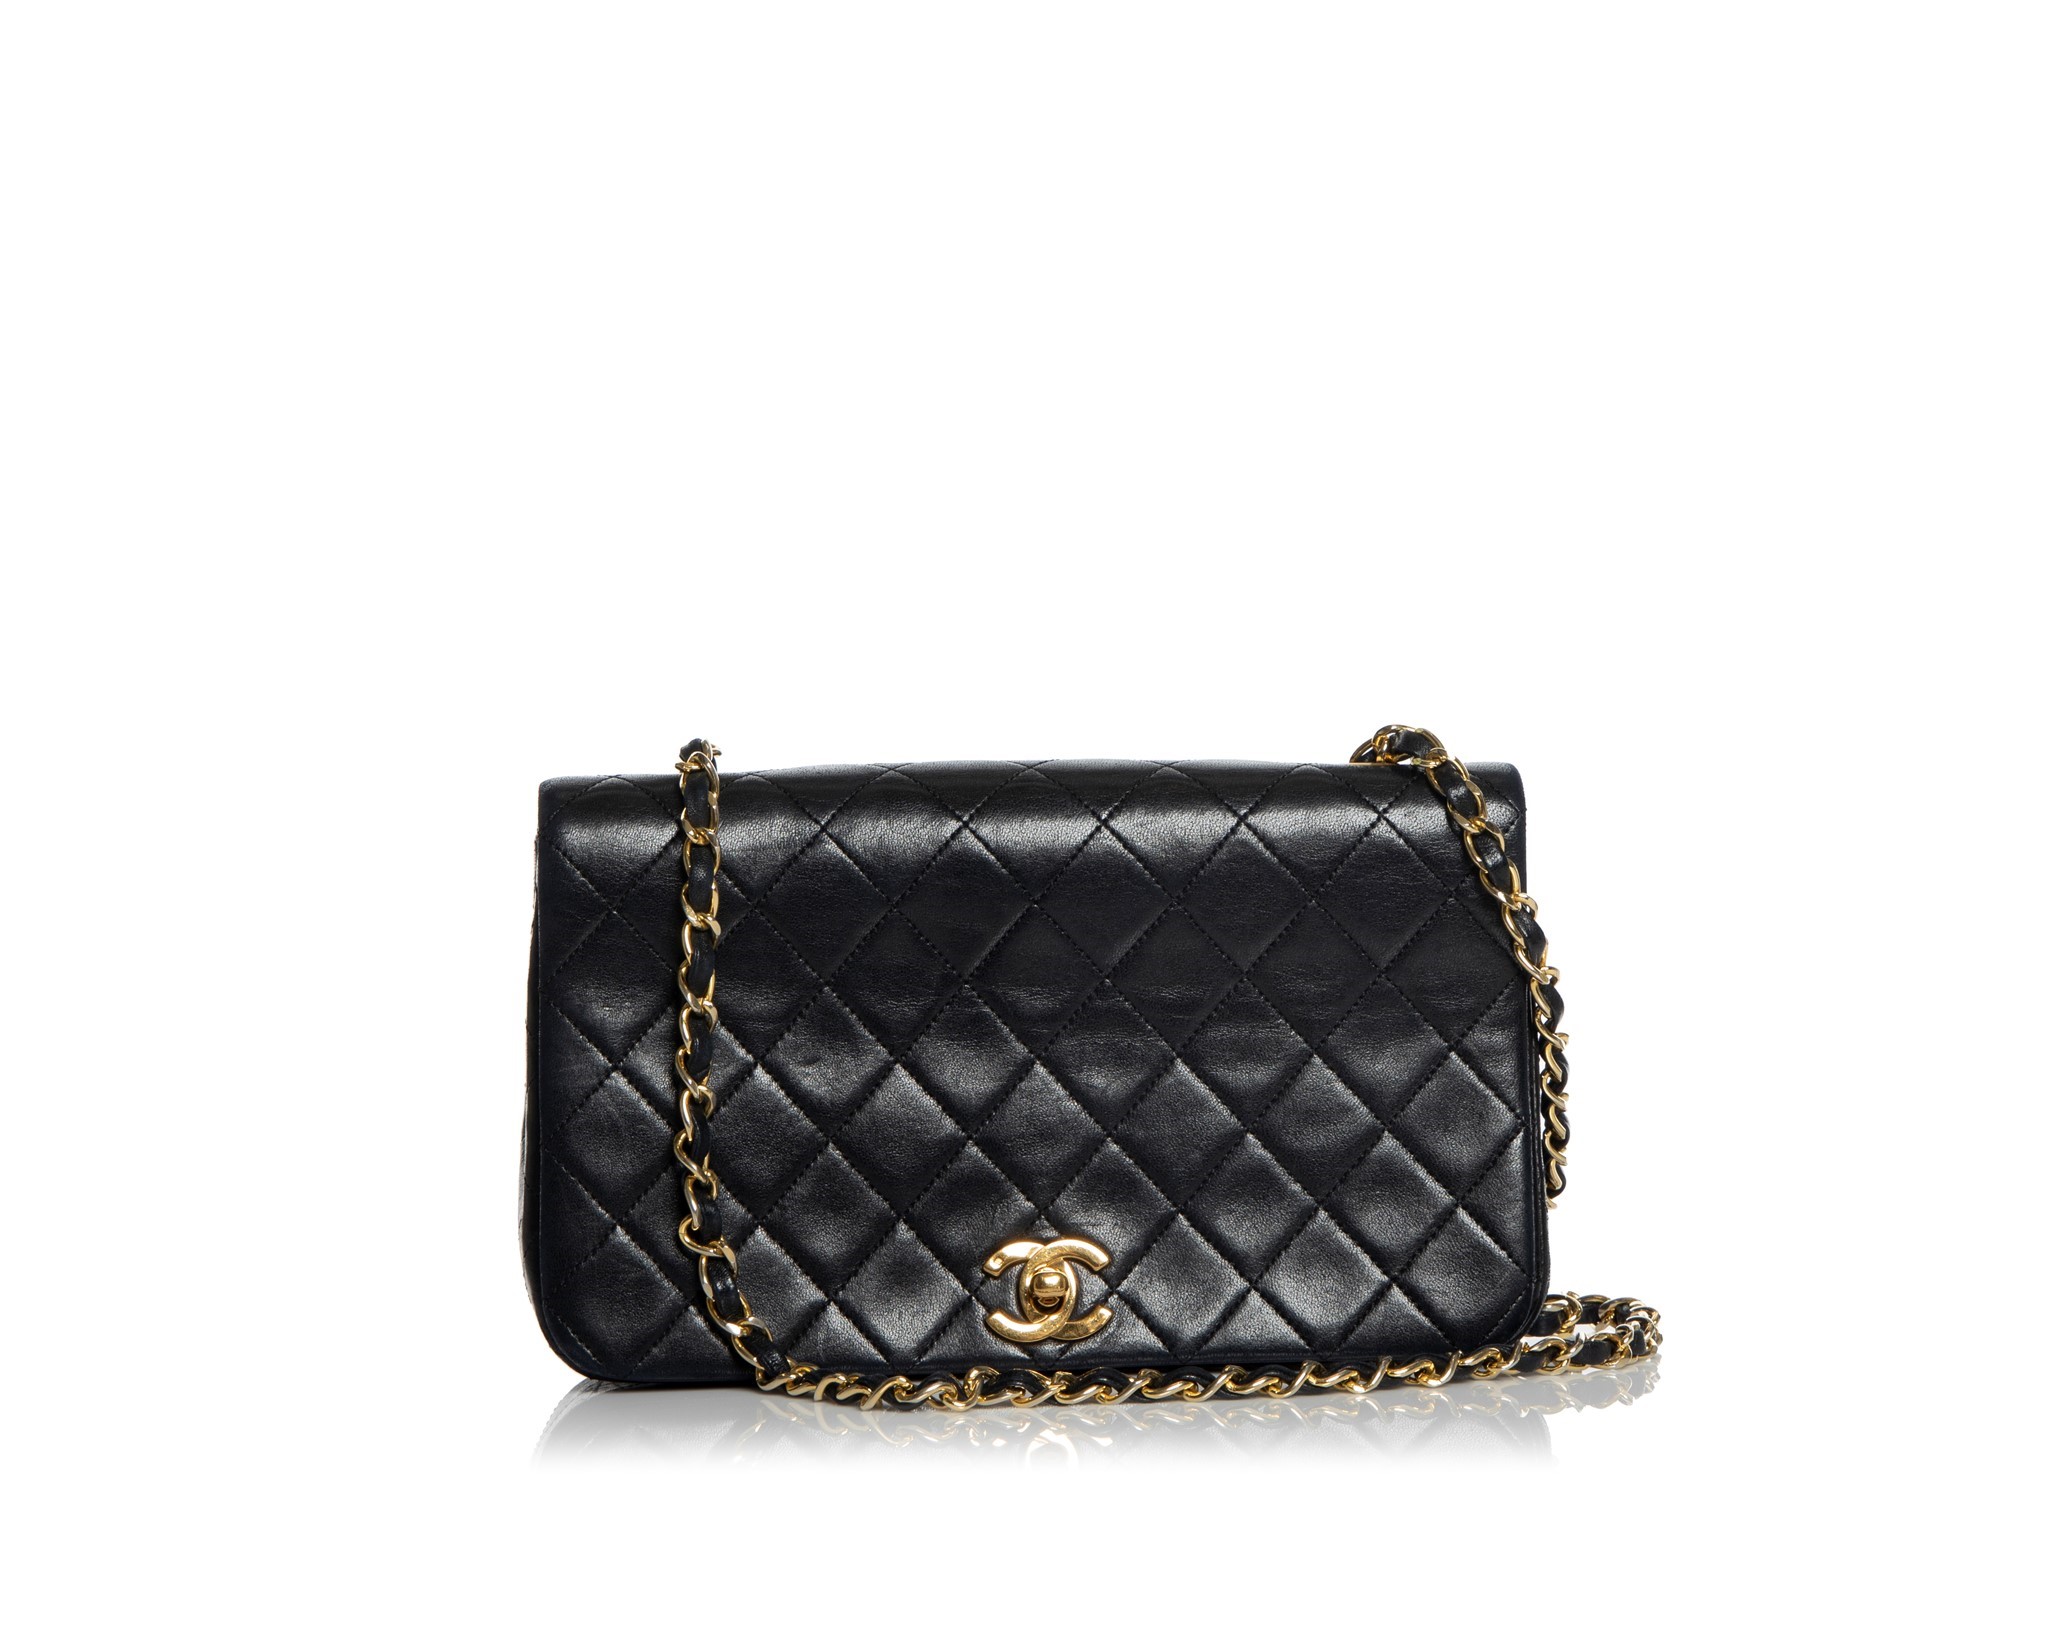 Chanel Medium Logo Gold Enchained Calfskin Quilted Black Leather Flap Bag   eBay